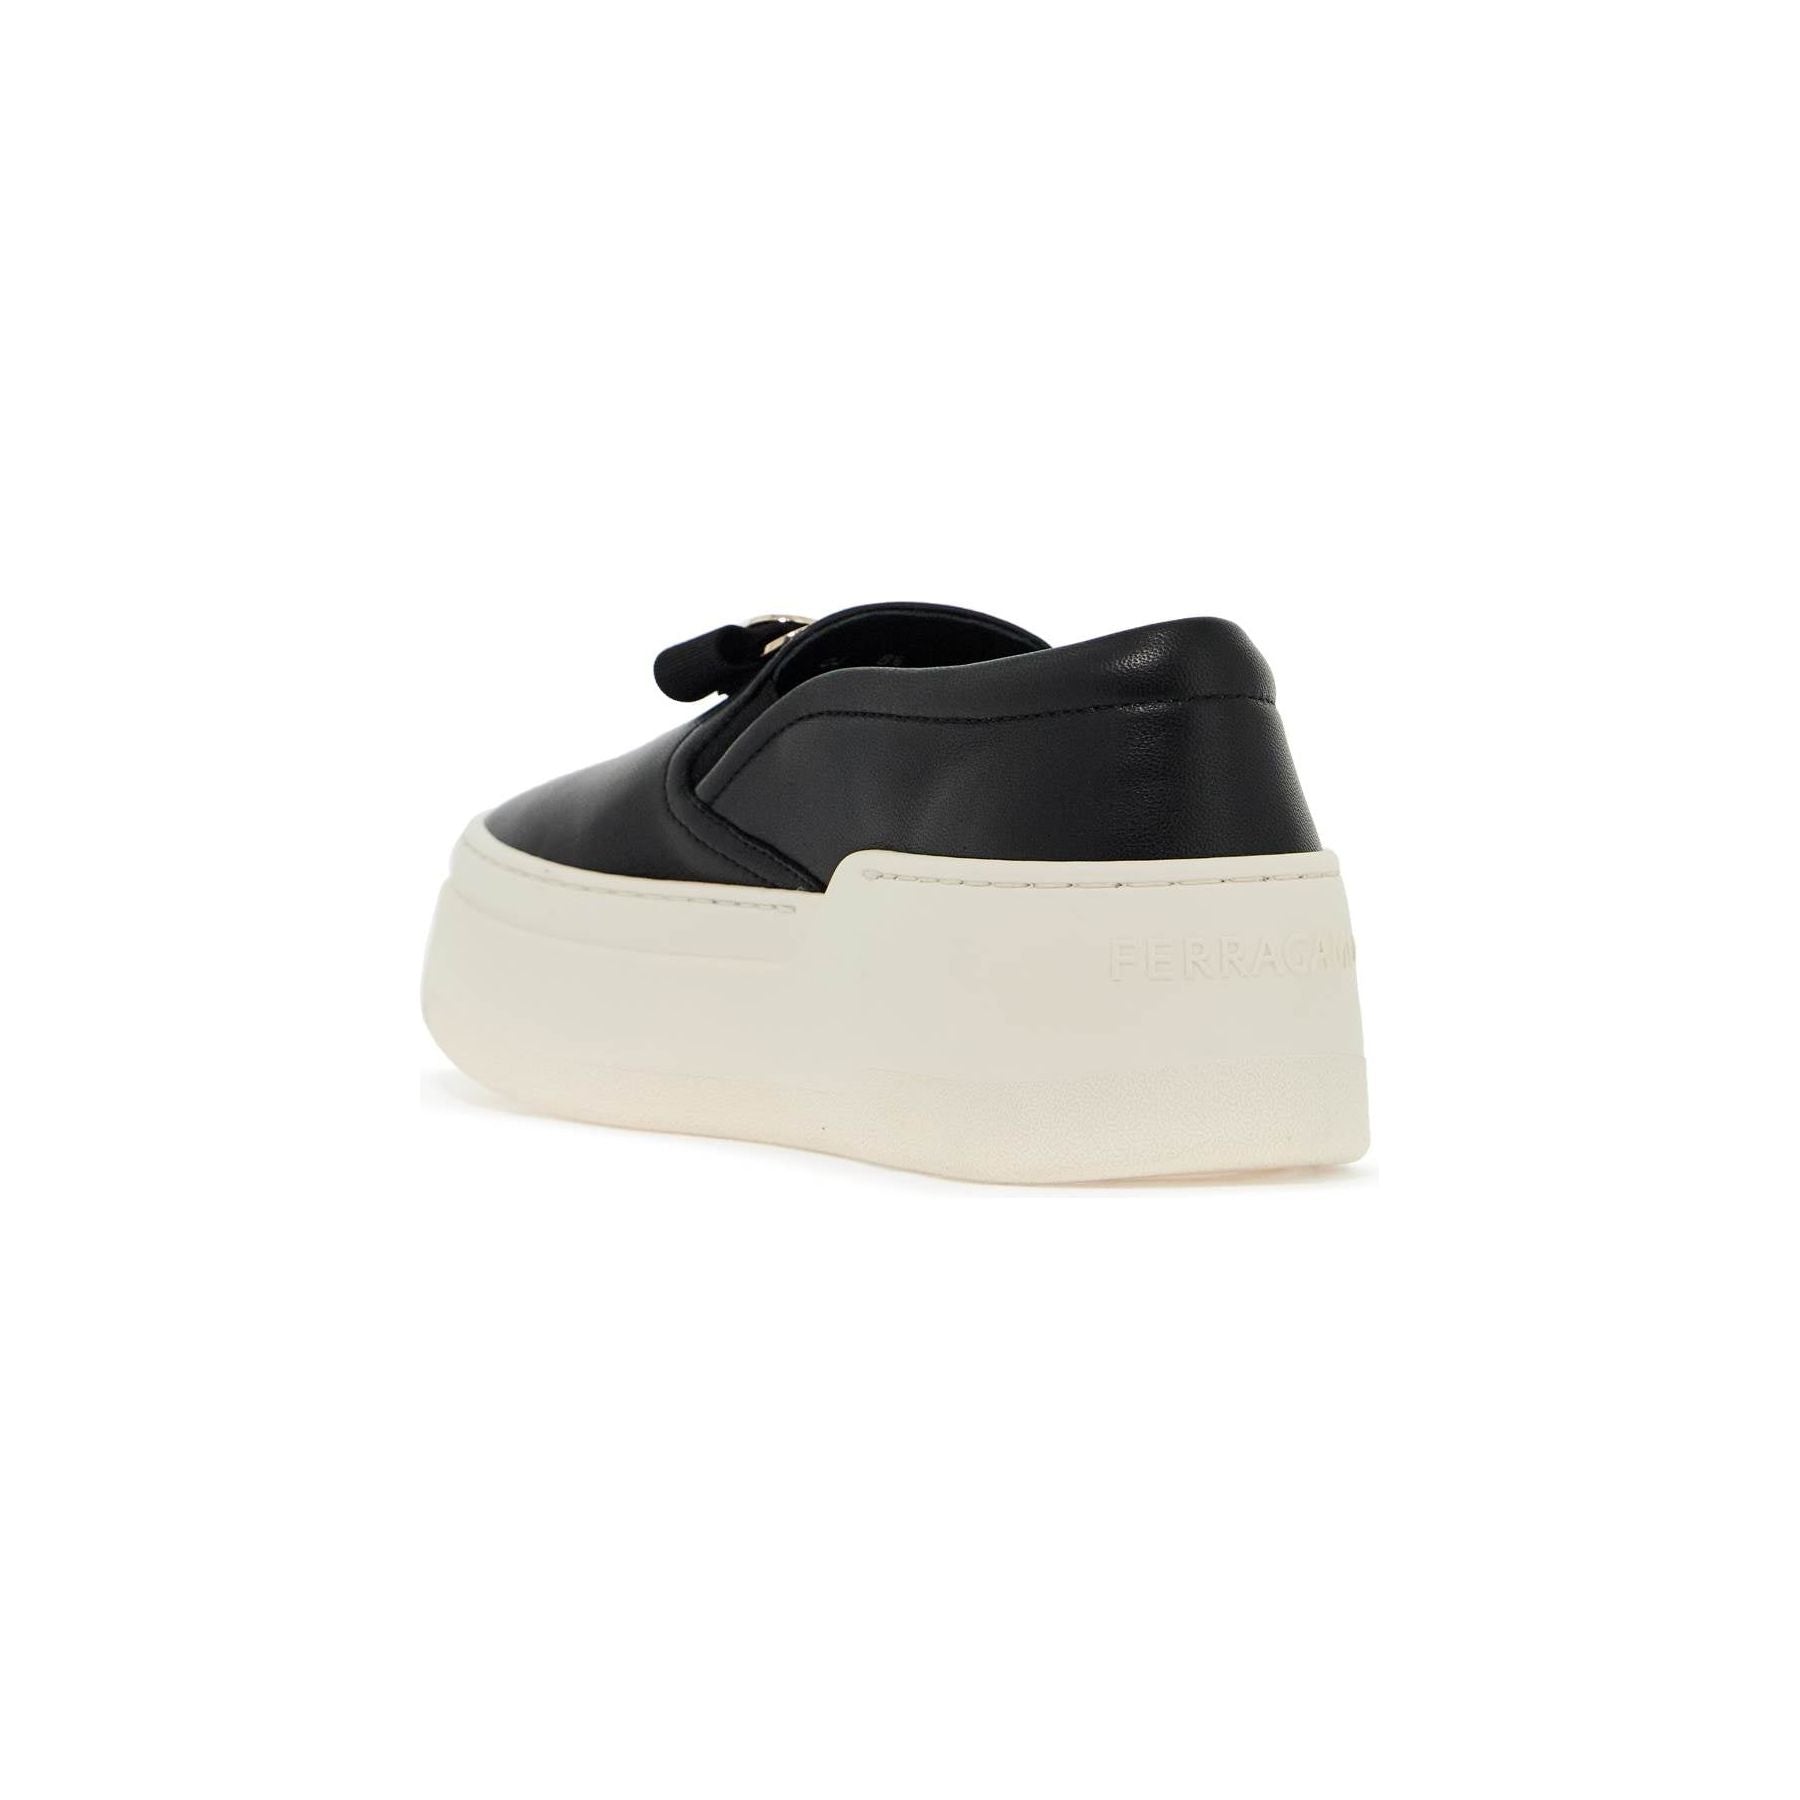 New Vara Plate 'Cristal' Slip On Nappa Leather Sneakers